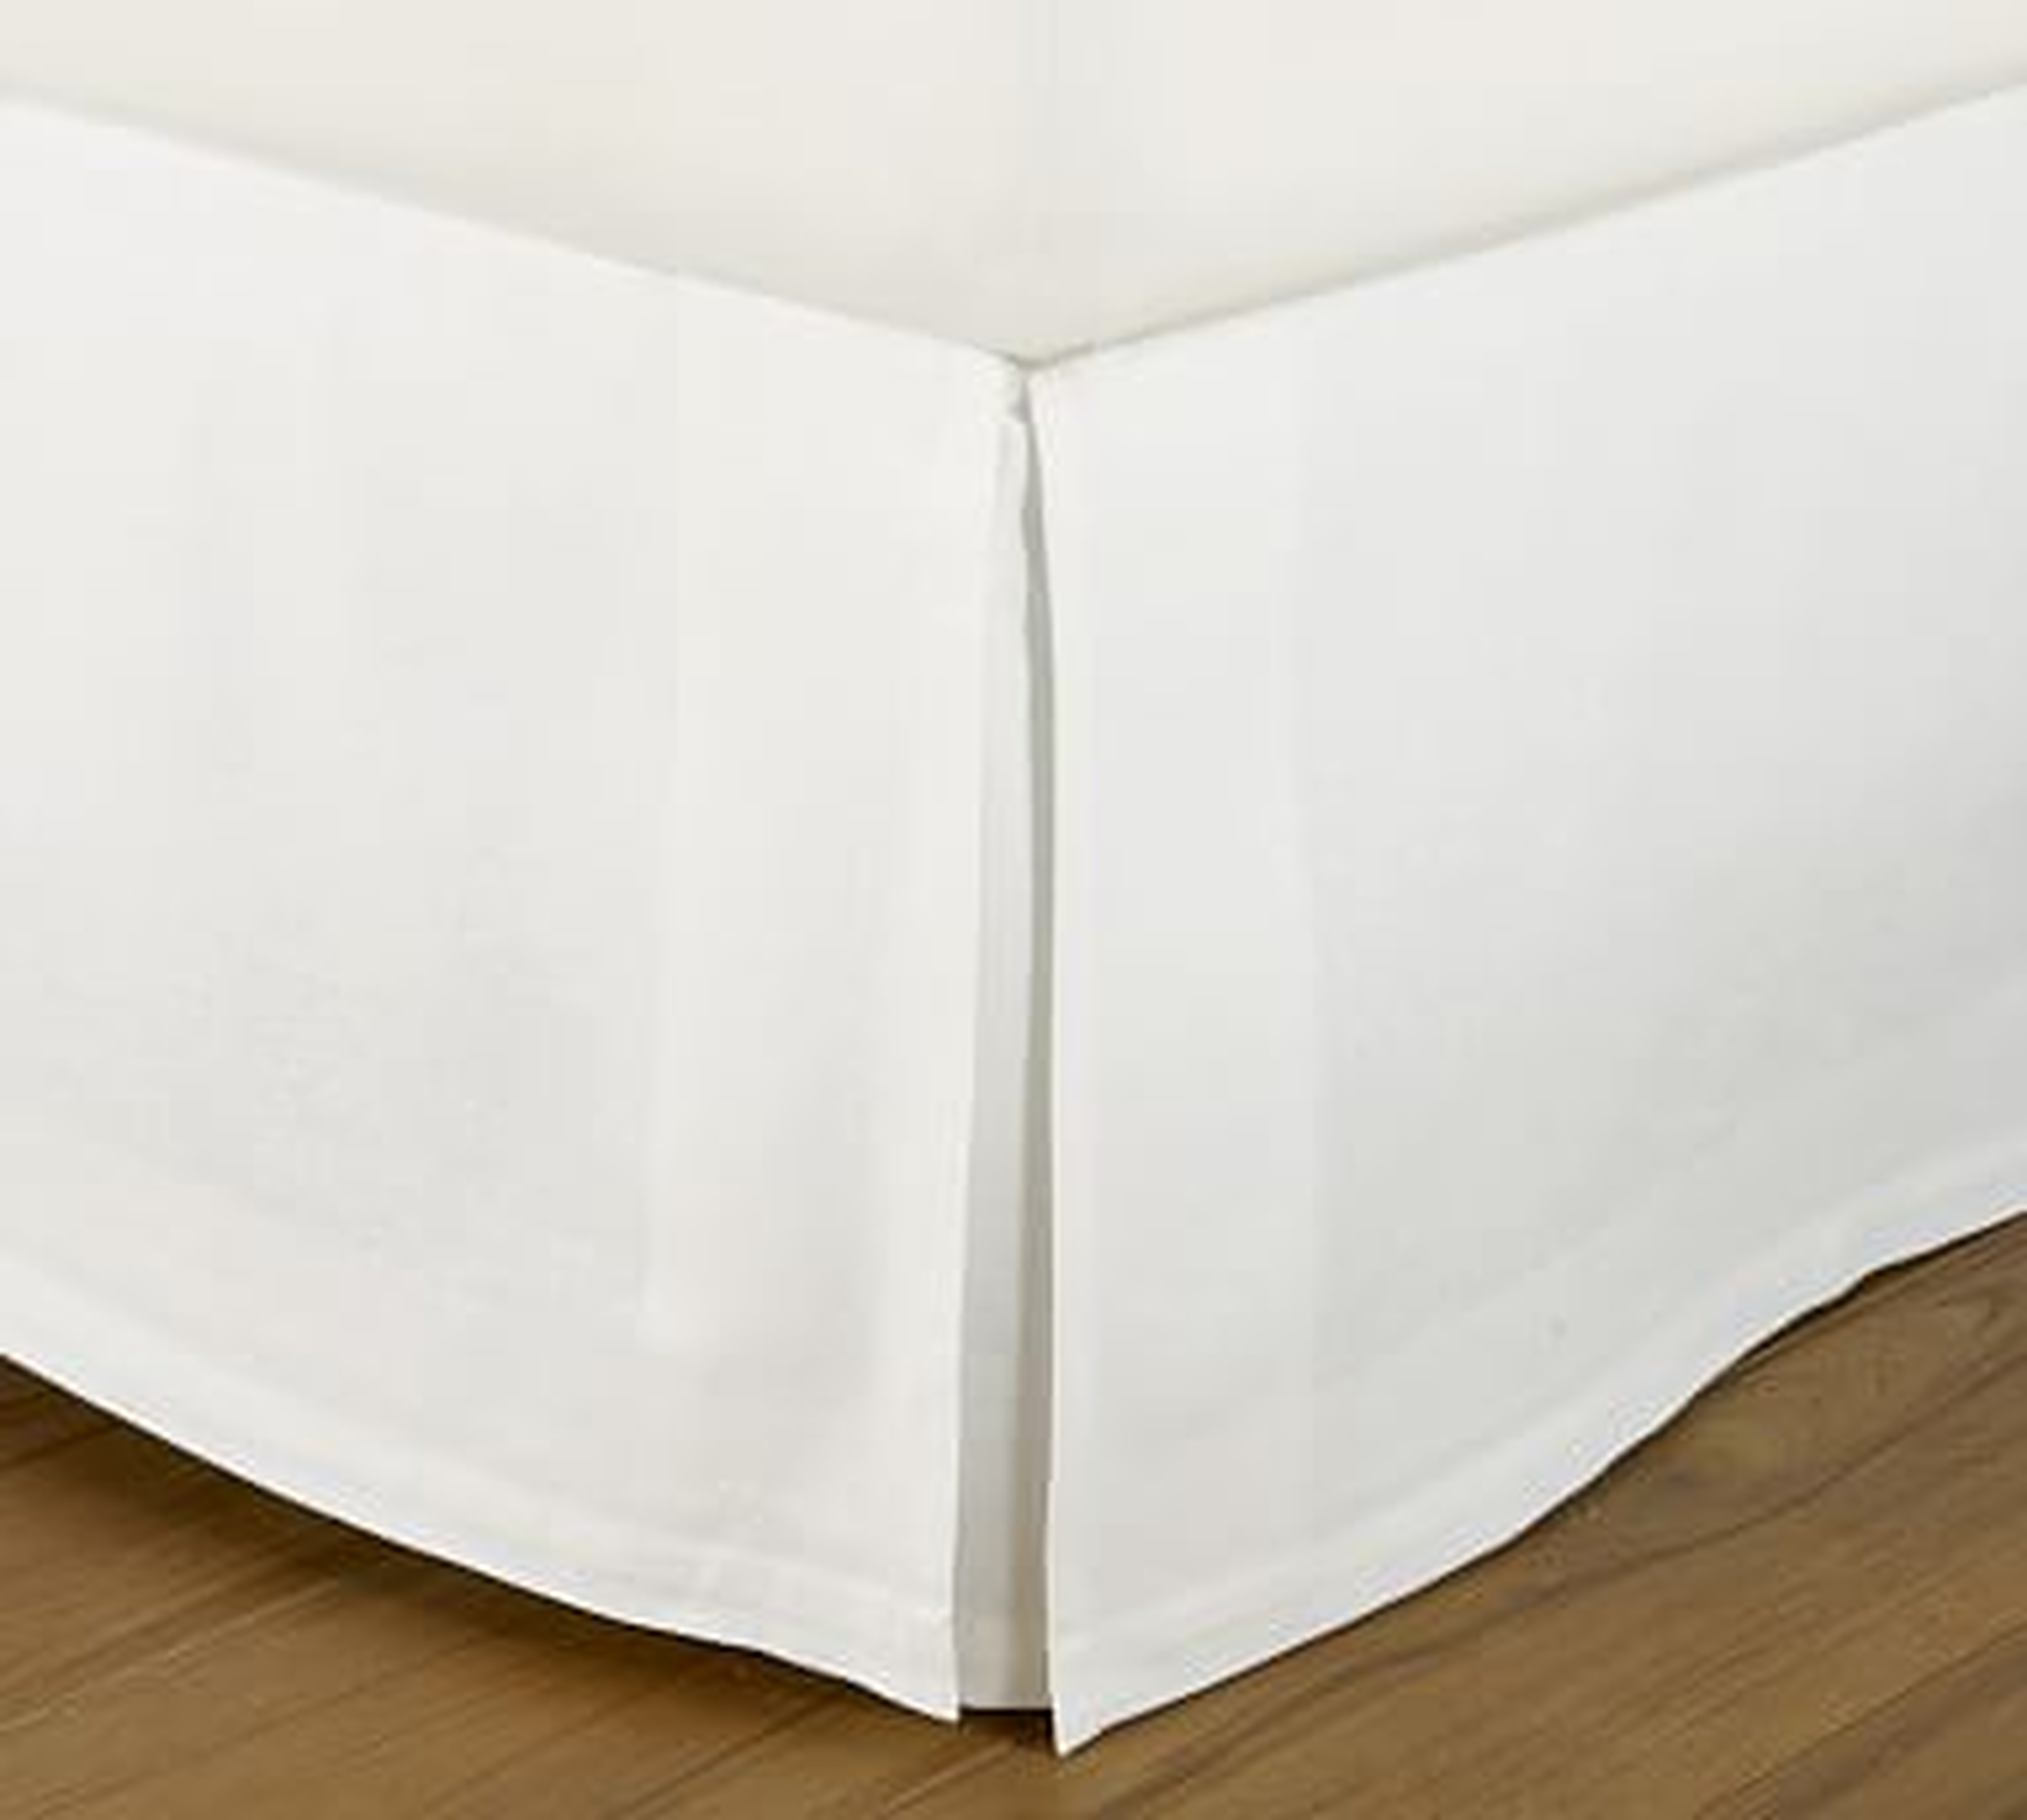 Essential Linen & Cotton Bed Skirt, 18" Drop, King, White - Pottery Barn